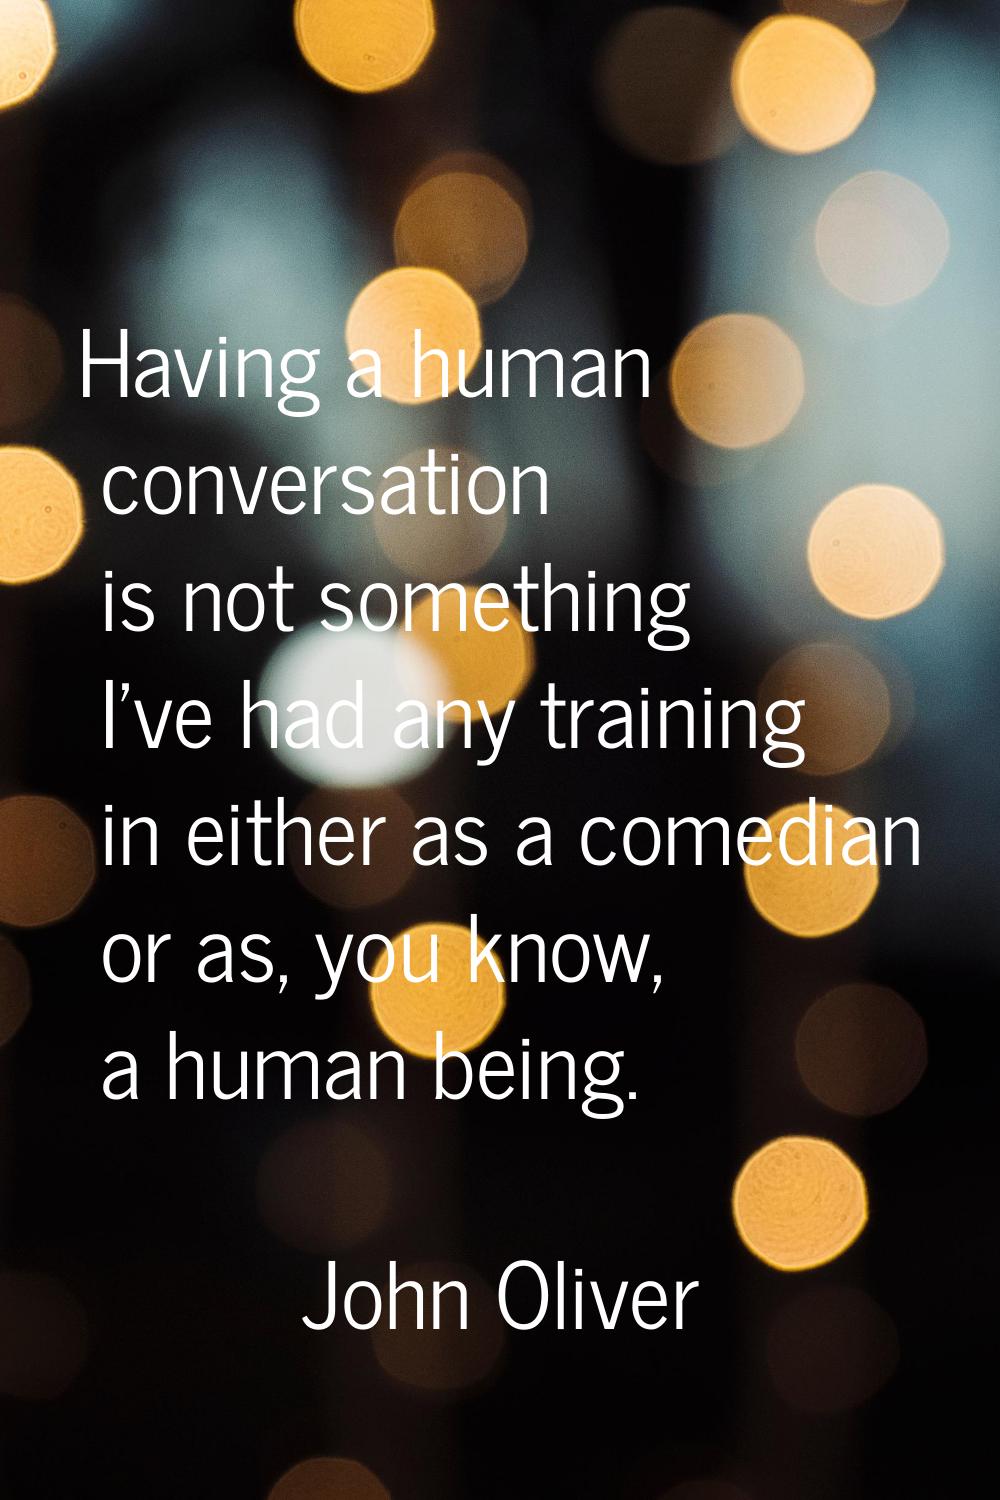 Having a human conversation is not something I've had any training in either as a comedian or as, y